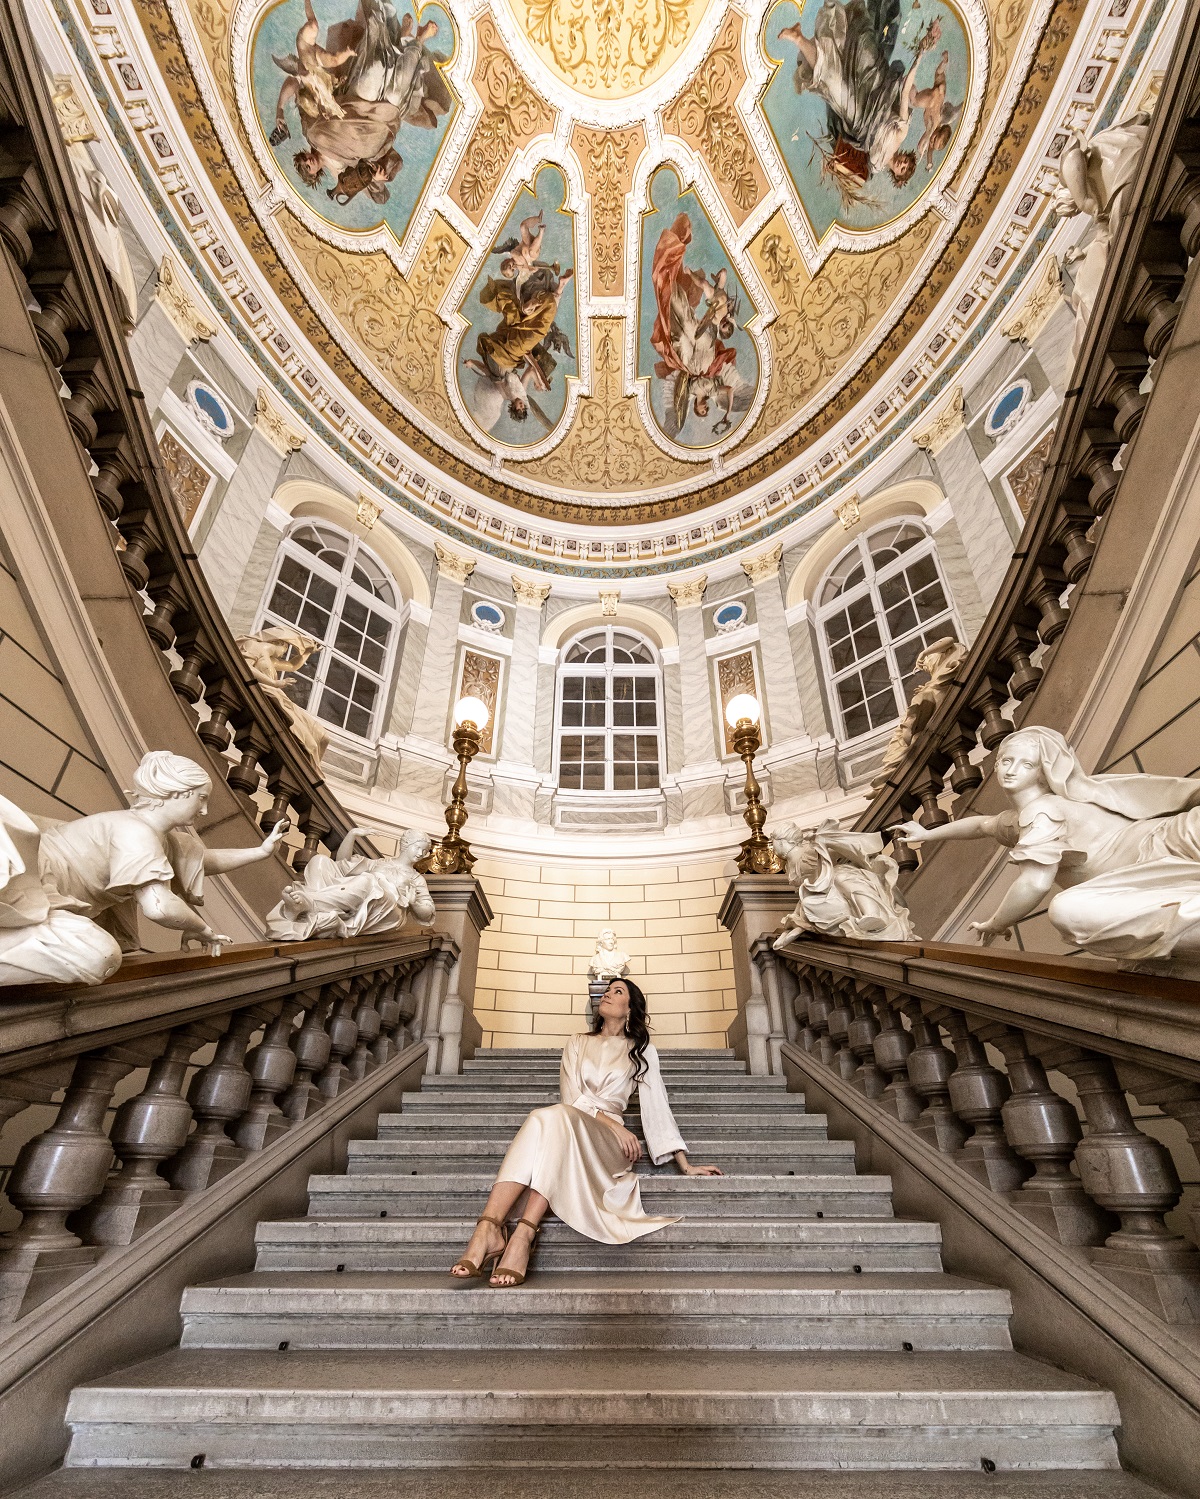 A woman sitting on a staircase. A glorious ceiling above her.